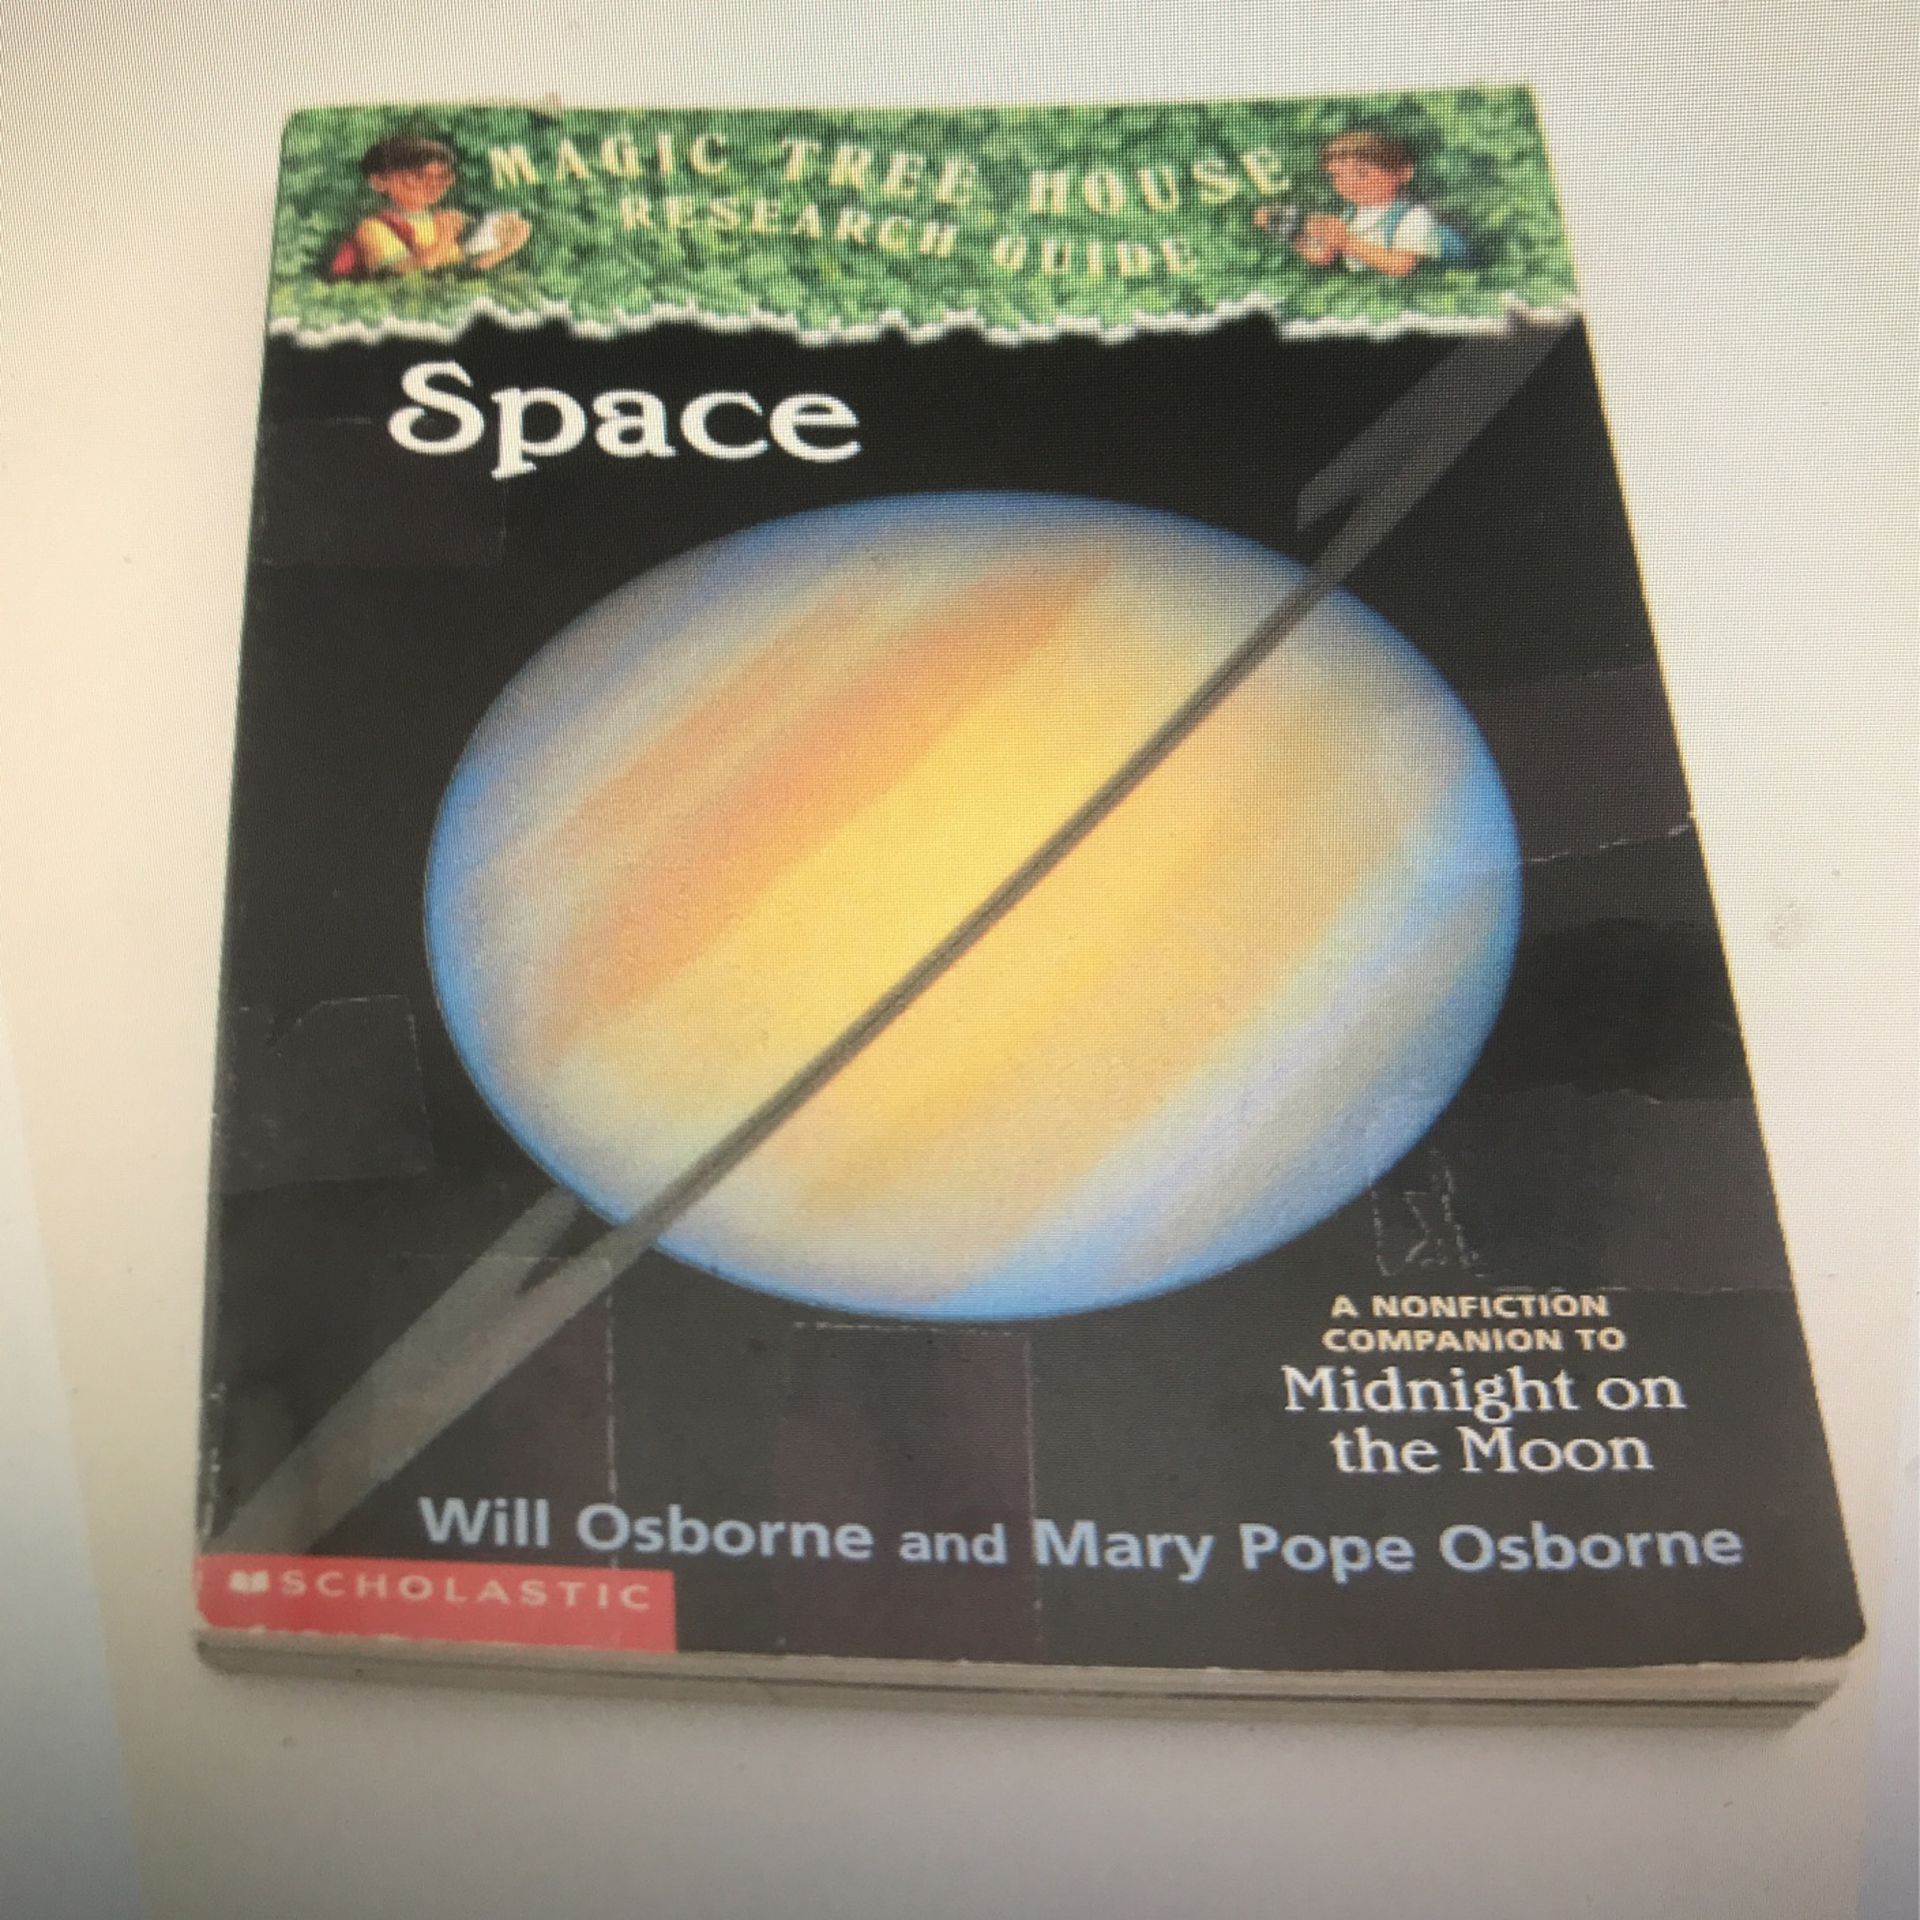 Magic Tree House Space Research Companion Guide Book by Will & Mary Pope Osborne